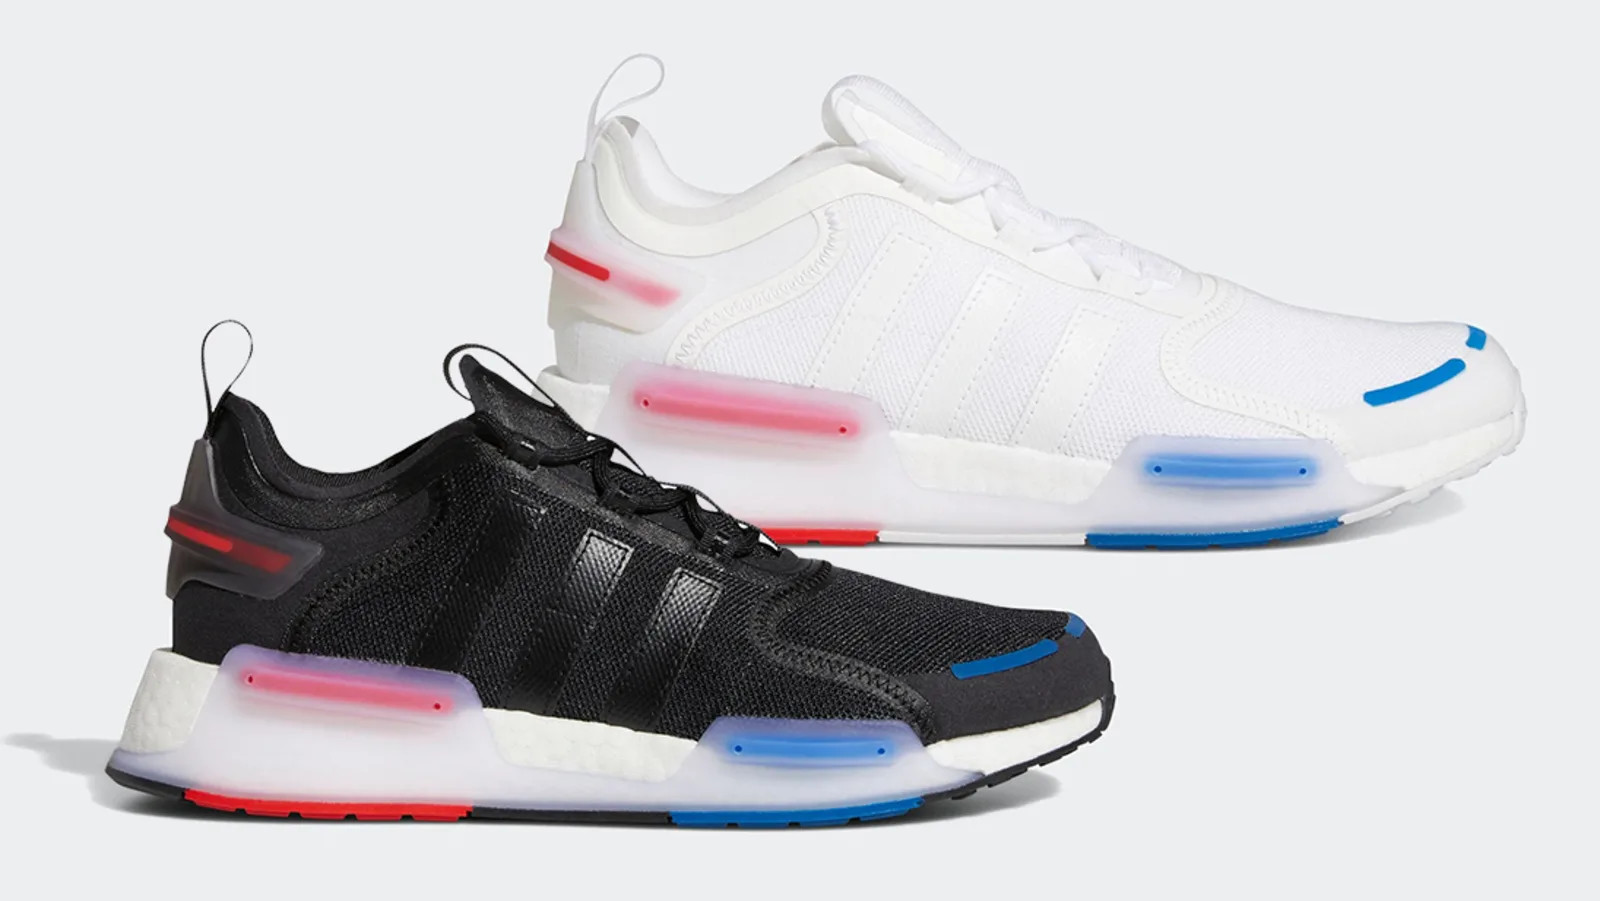 Adidas NMD Surfaces In Two OG Colorways: Photos